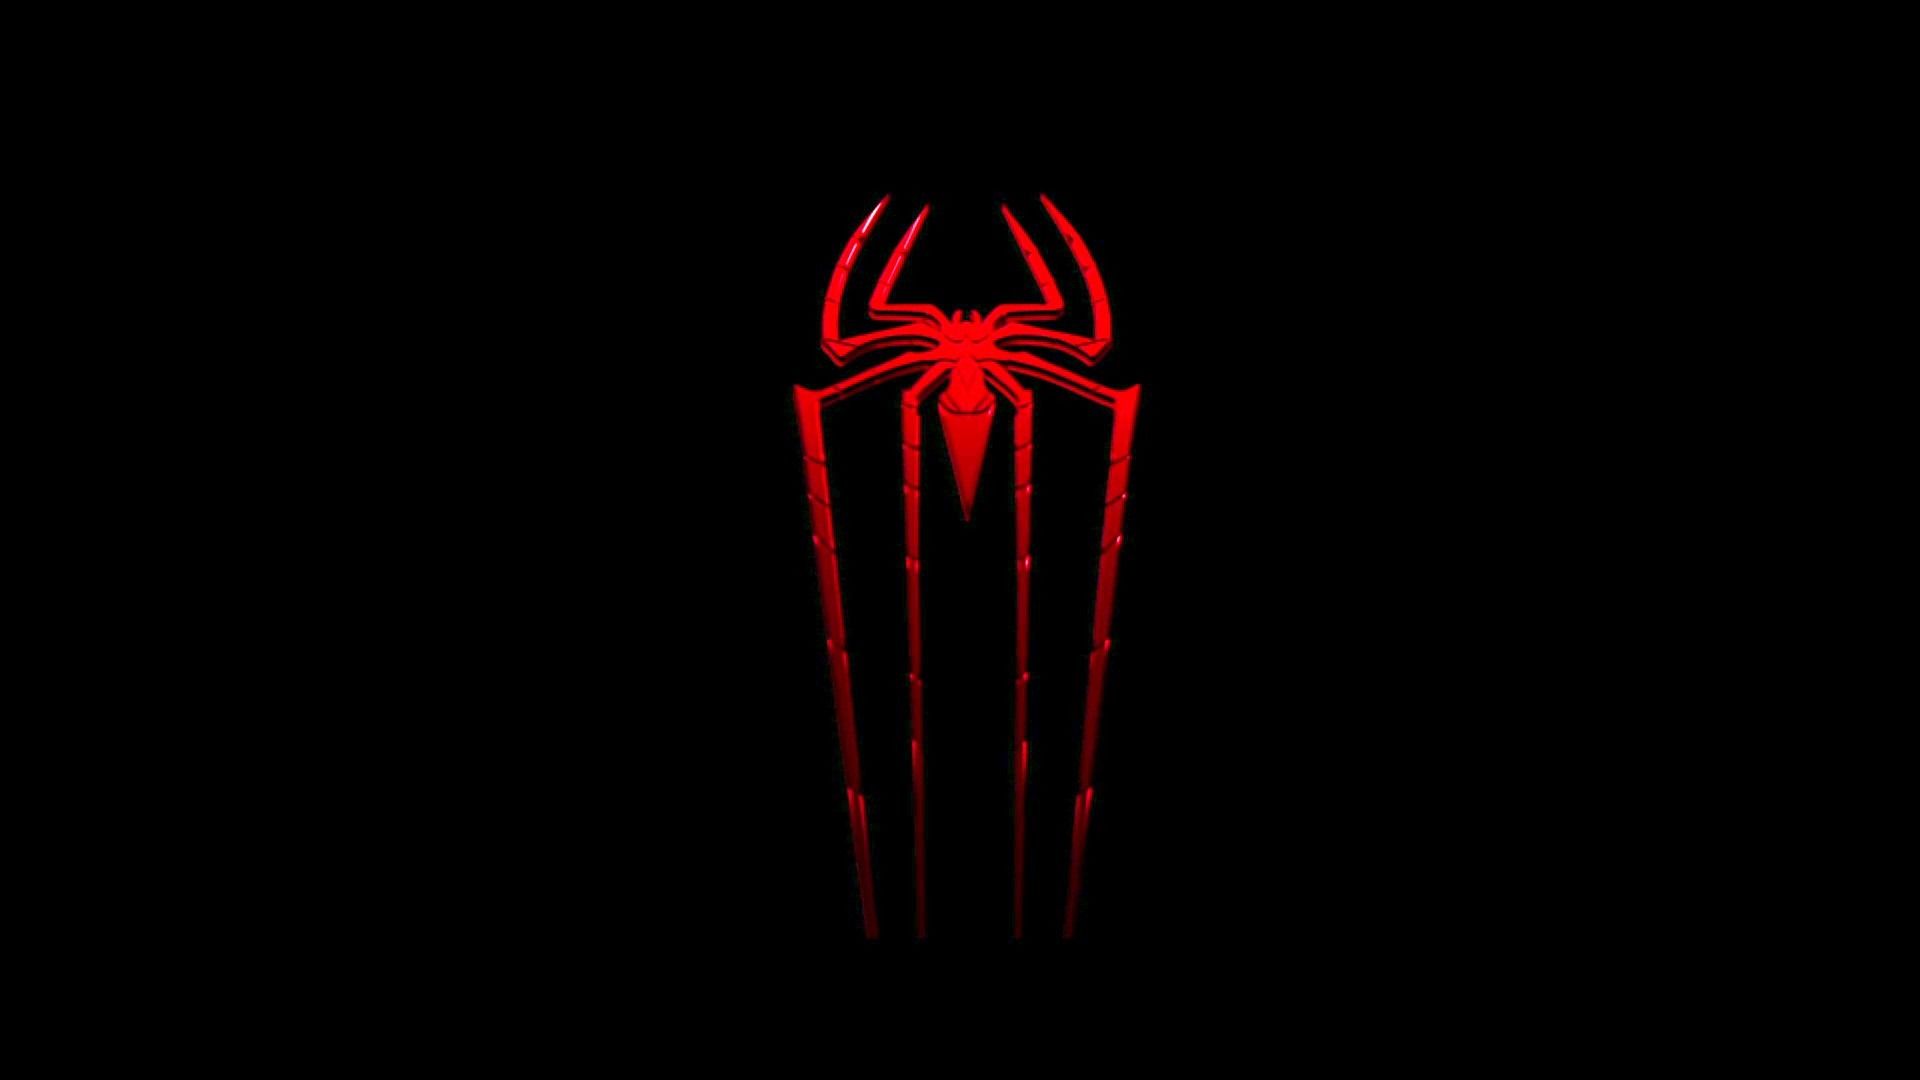 Awesome The Amazing Spiderman HD Wallpaper Free Download. Logo wallpaper hd, Black wallpaper, Spiderman image